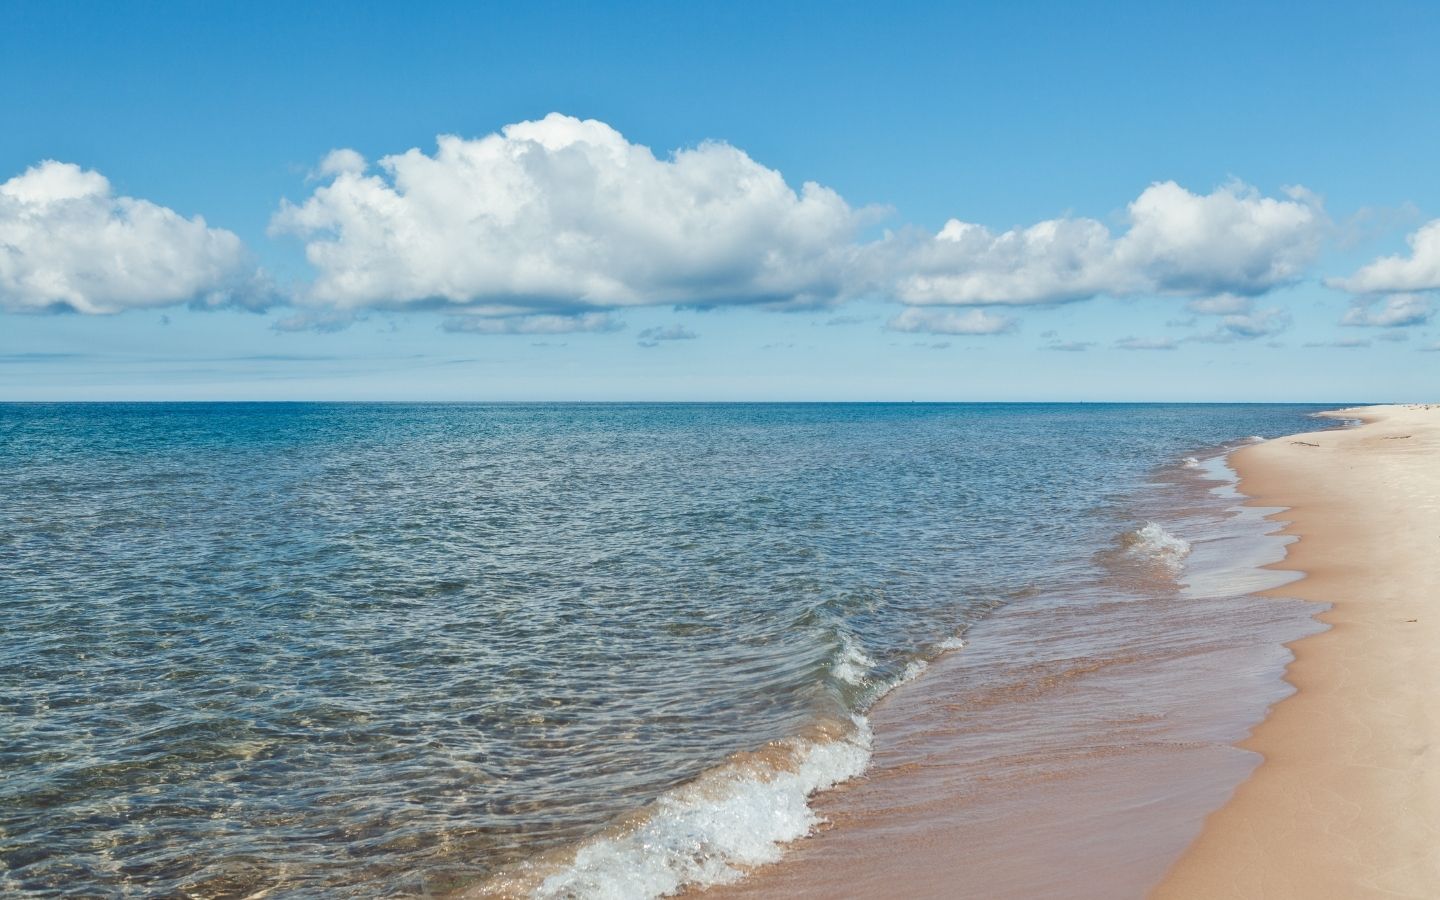 Beautiful view of Lake Michigan on a sunny day with puffy white clouds, a sandy beach, and gentle waves